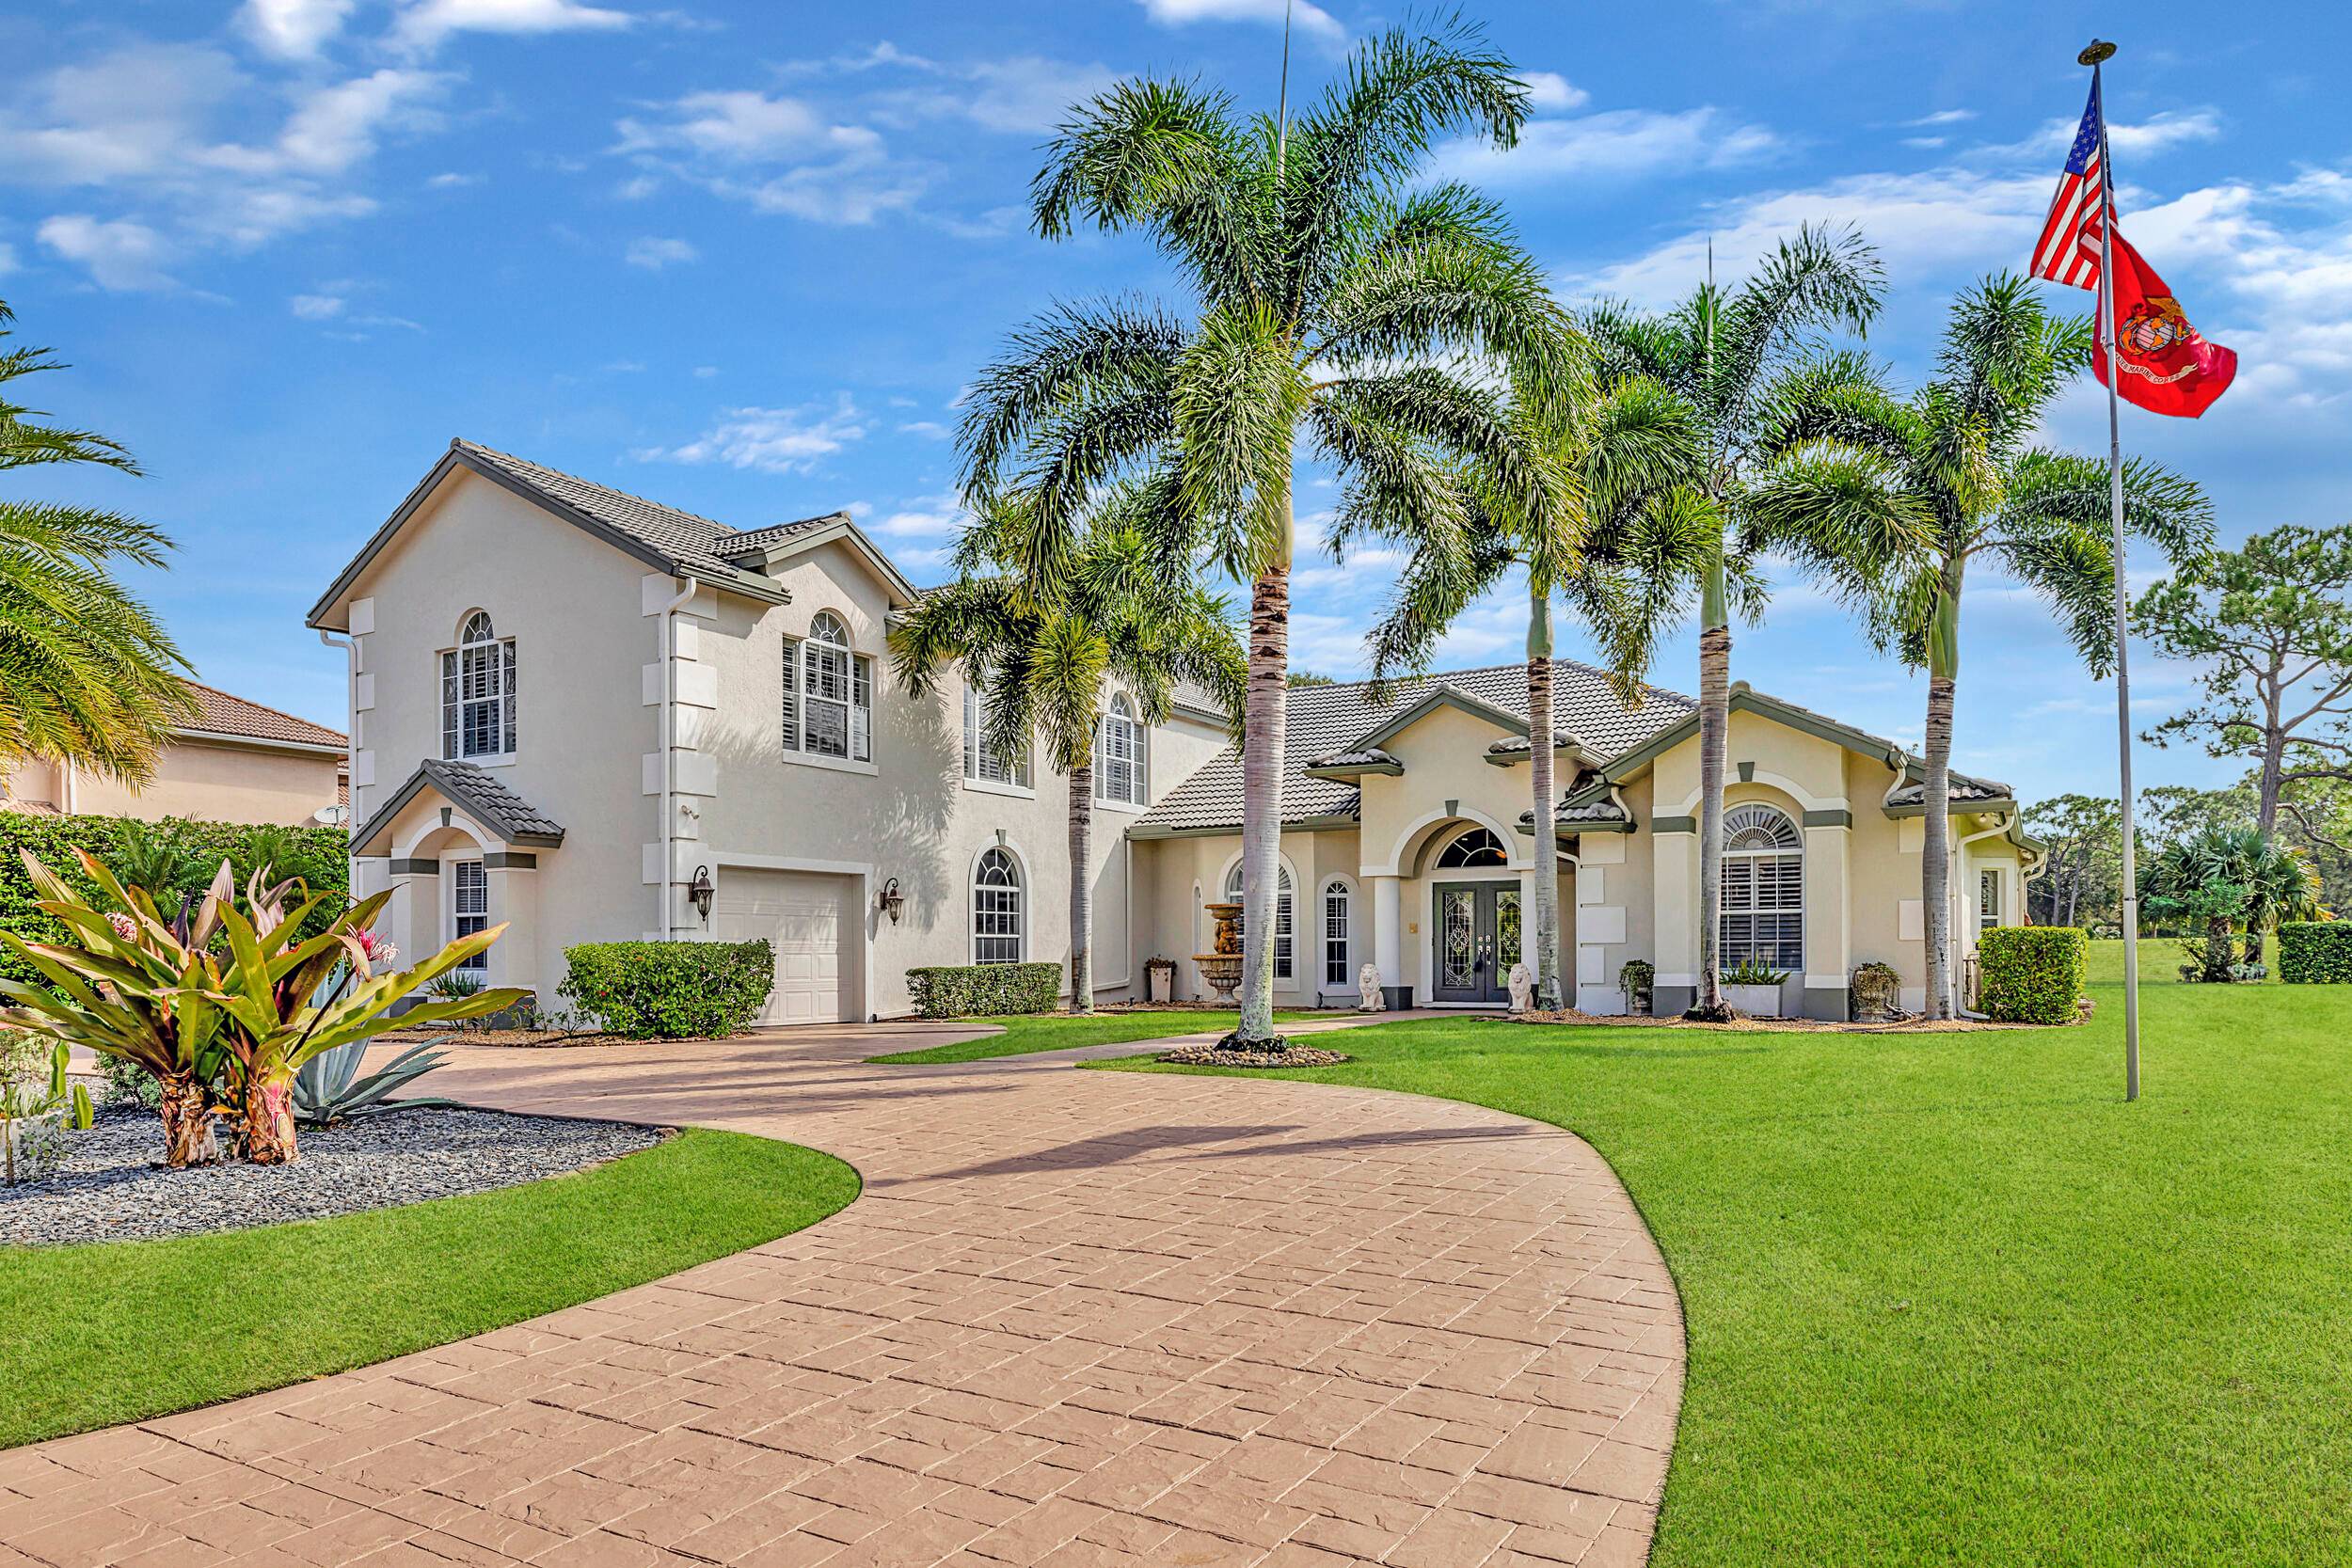 Exquisite 7 bedroom, 5 bathroom, 3 car garage residence nestled within the prestigious gated community of Meadowood.